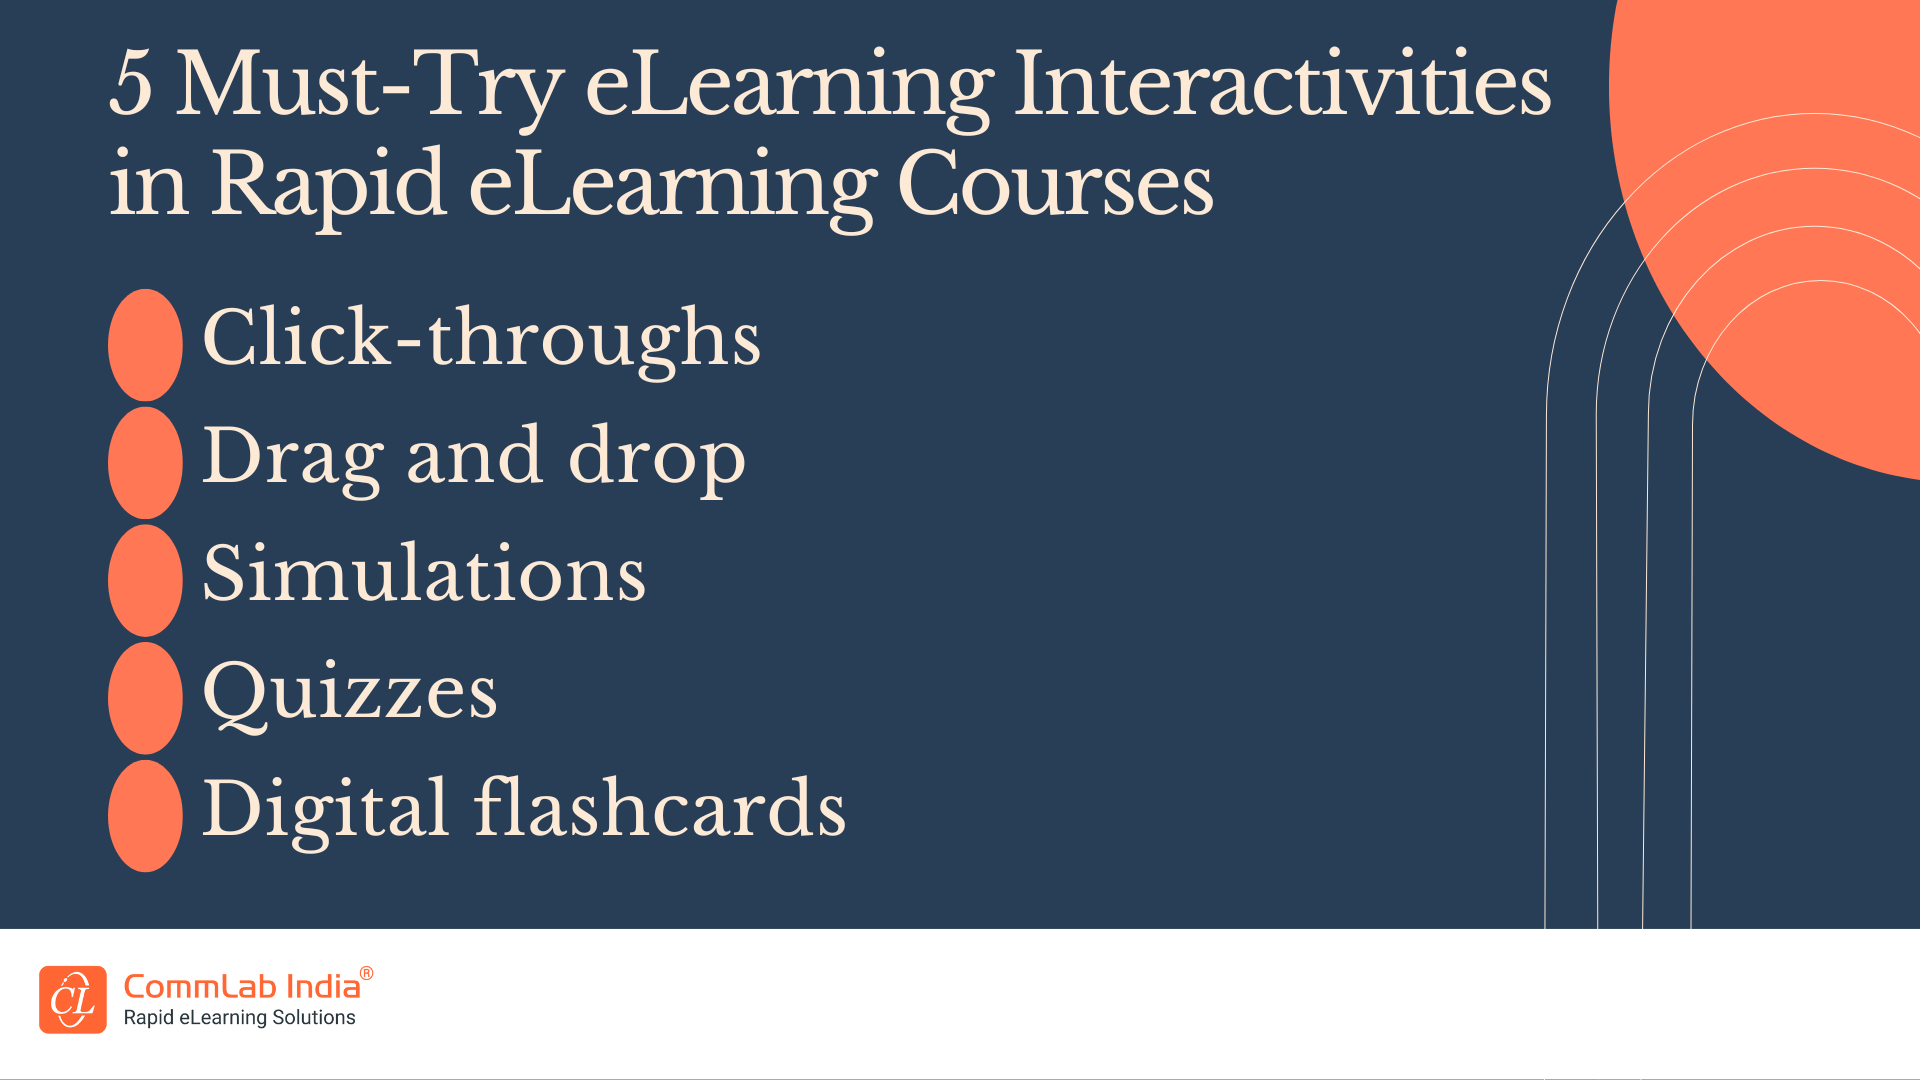 5 Must-Try eLearning Interactivities in Rapid eLearning Courses